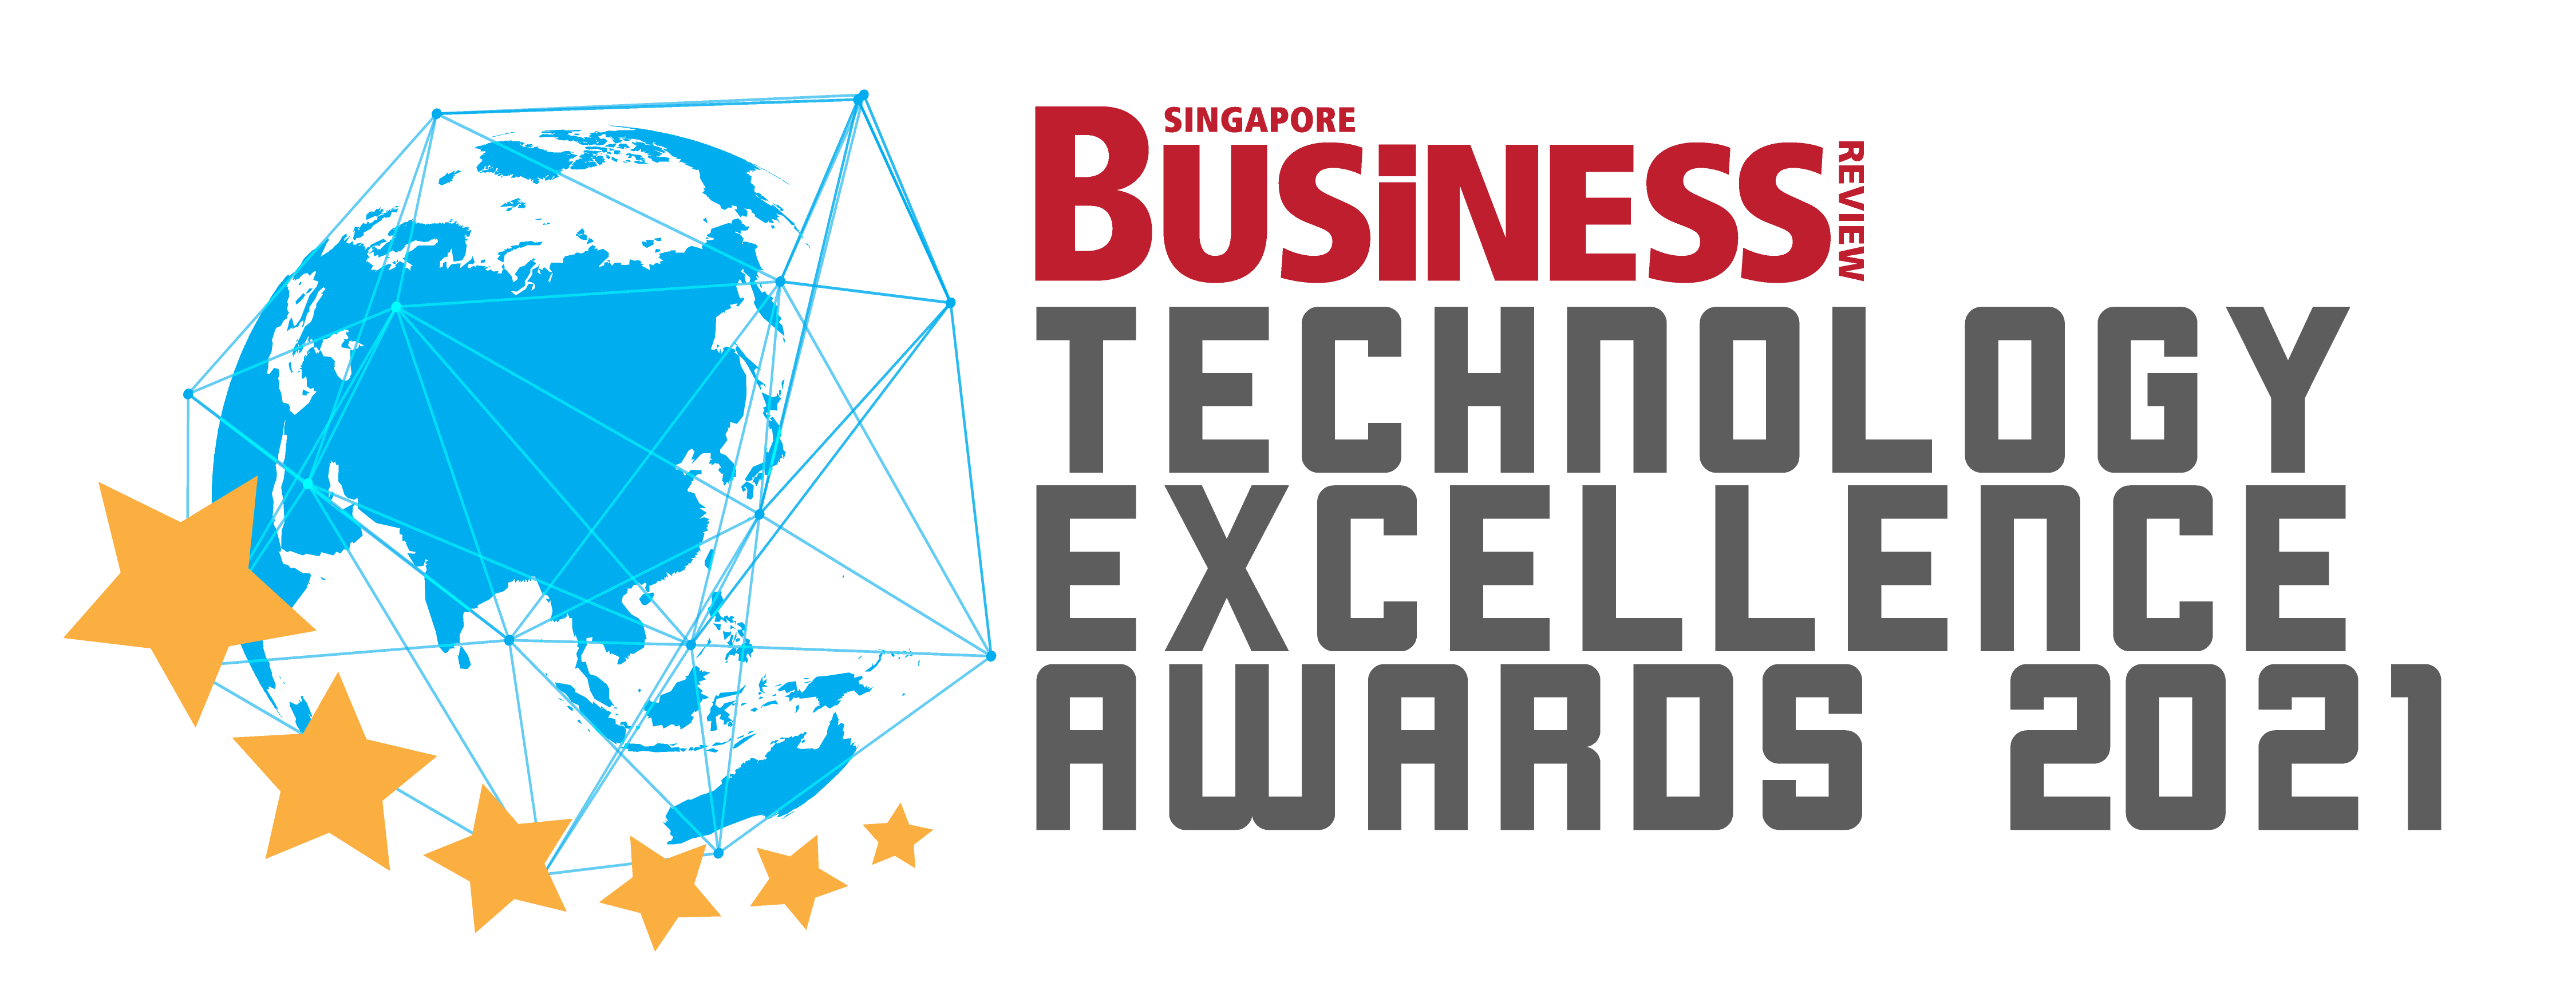 Singapore Business Review Technology Excellence Award 2021